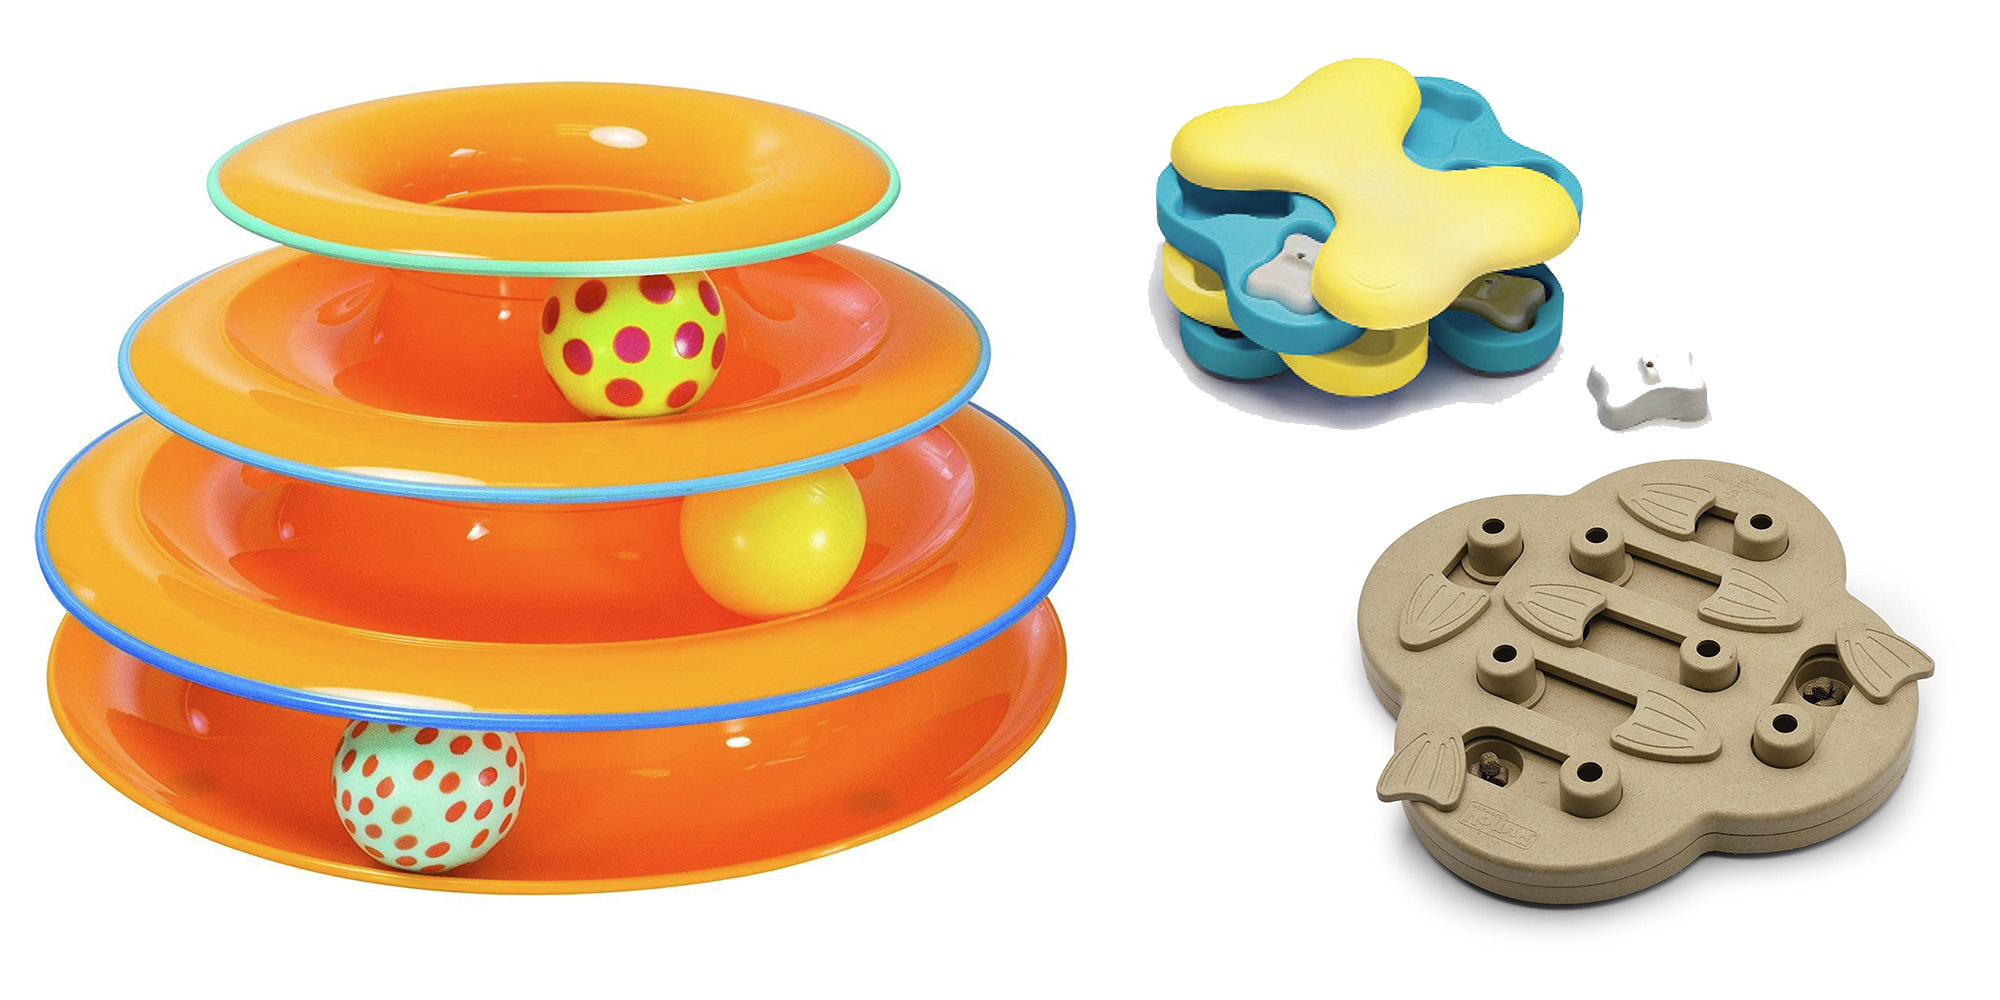 Pick up a new cat or dog toy in today's Amazon Gold Box from $8